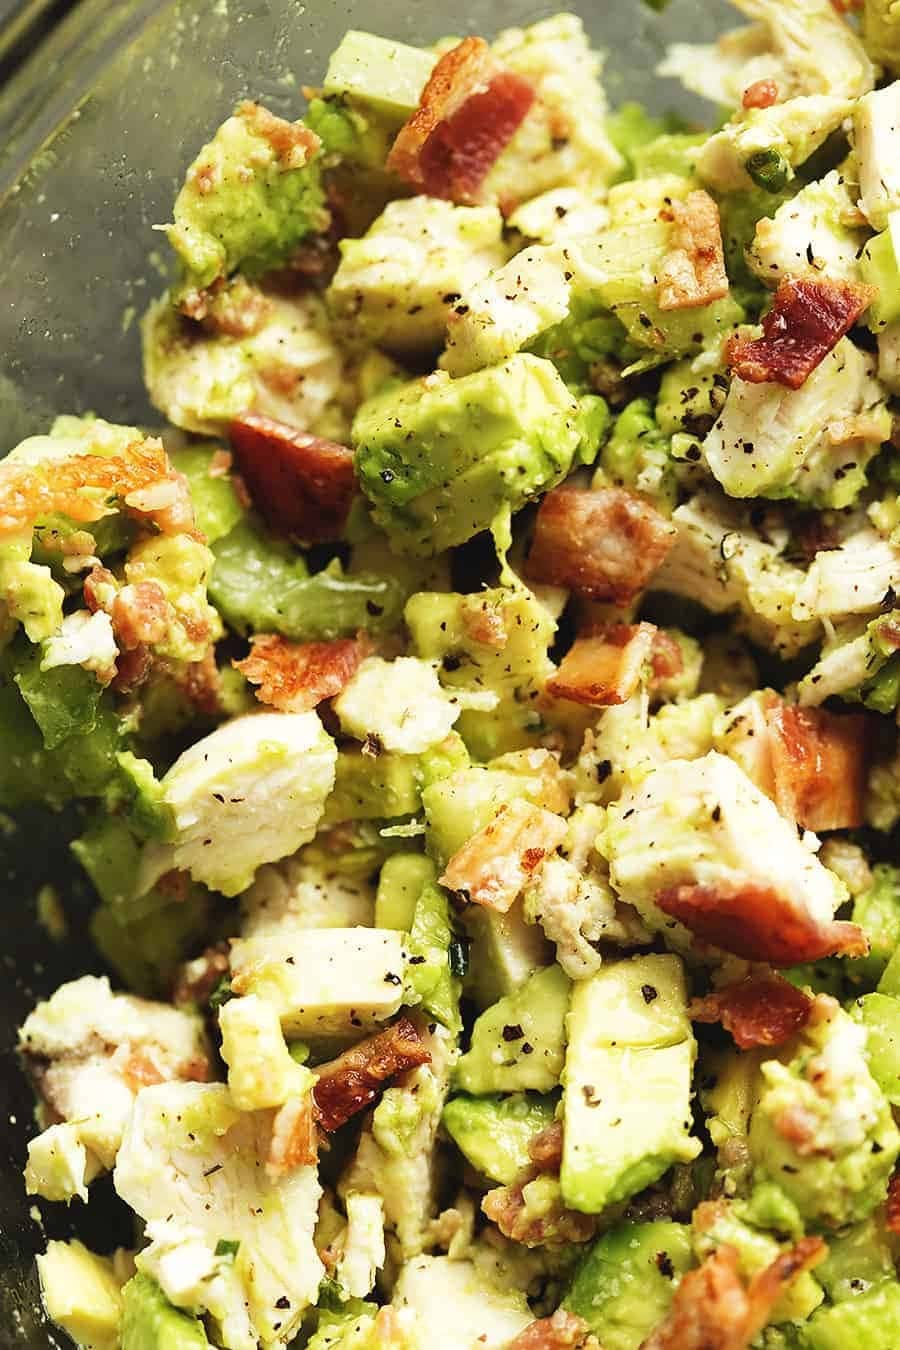 Chicken salad with avocado and bacon.